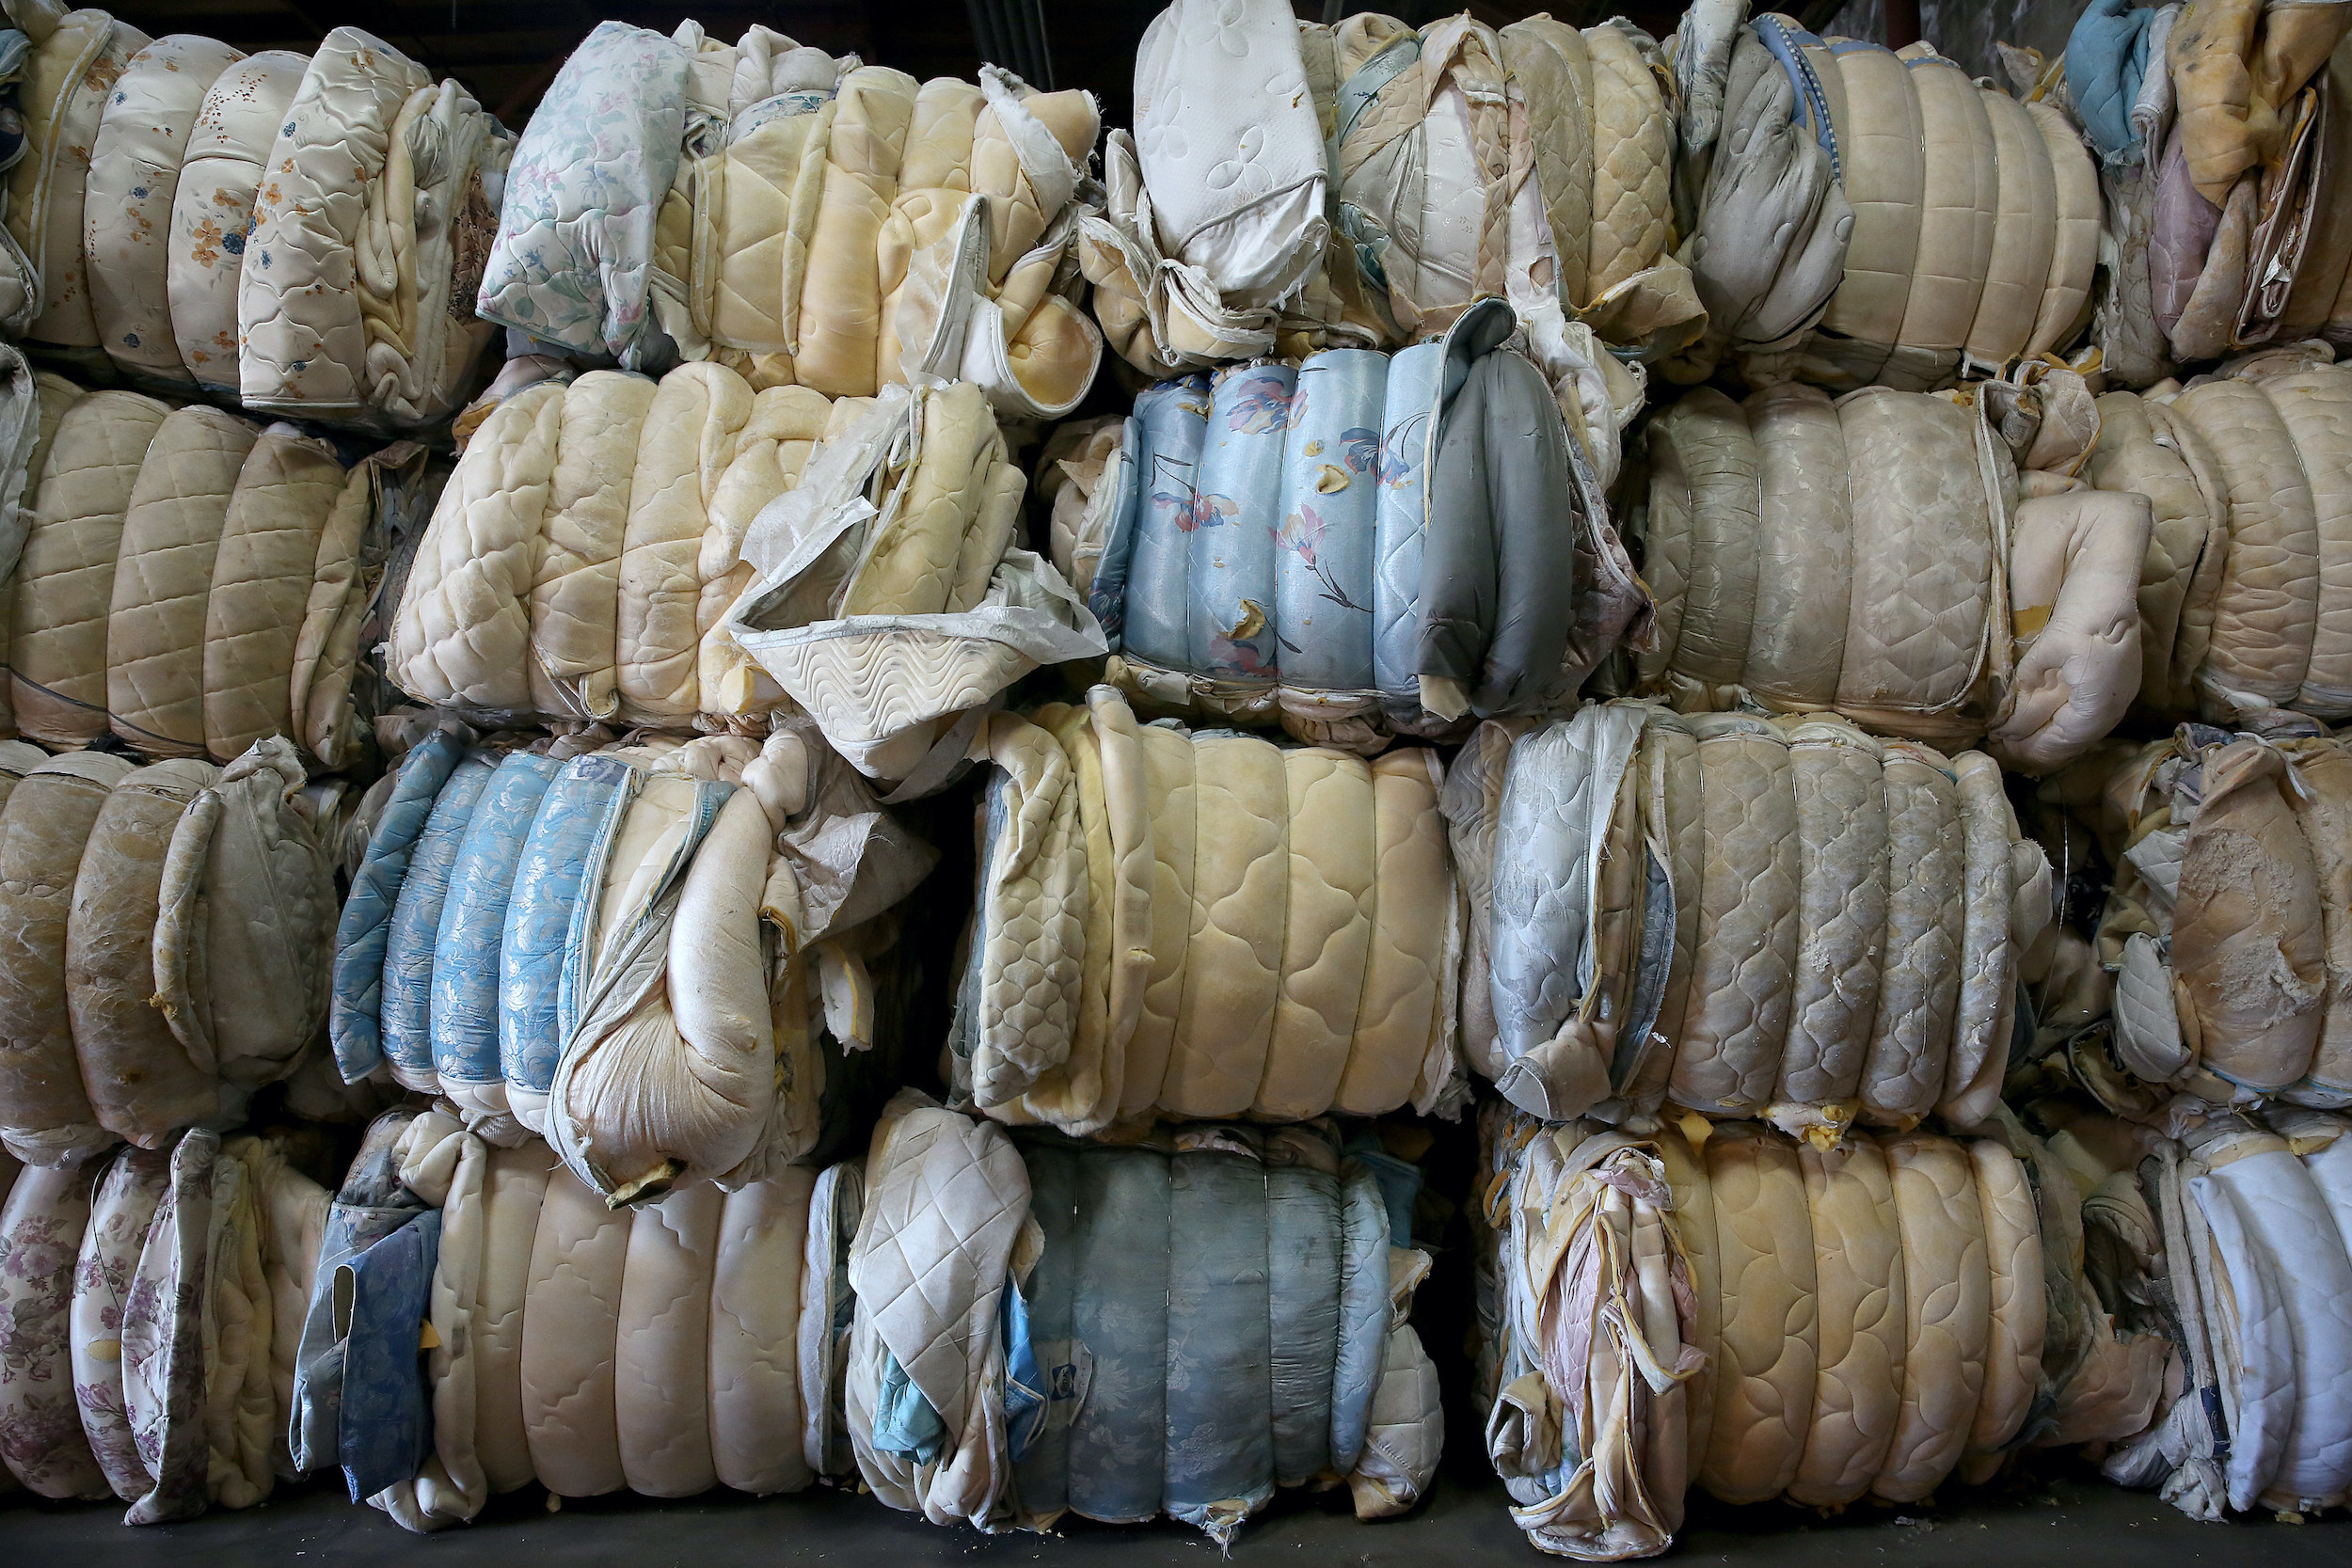 Mattresses are rolled and stacked in a pile in a warehouse in California.